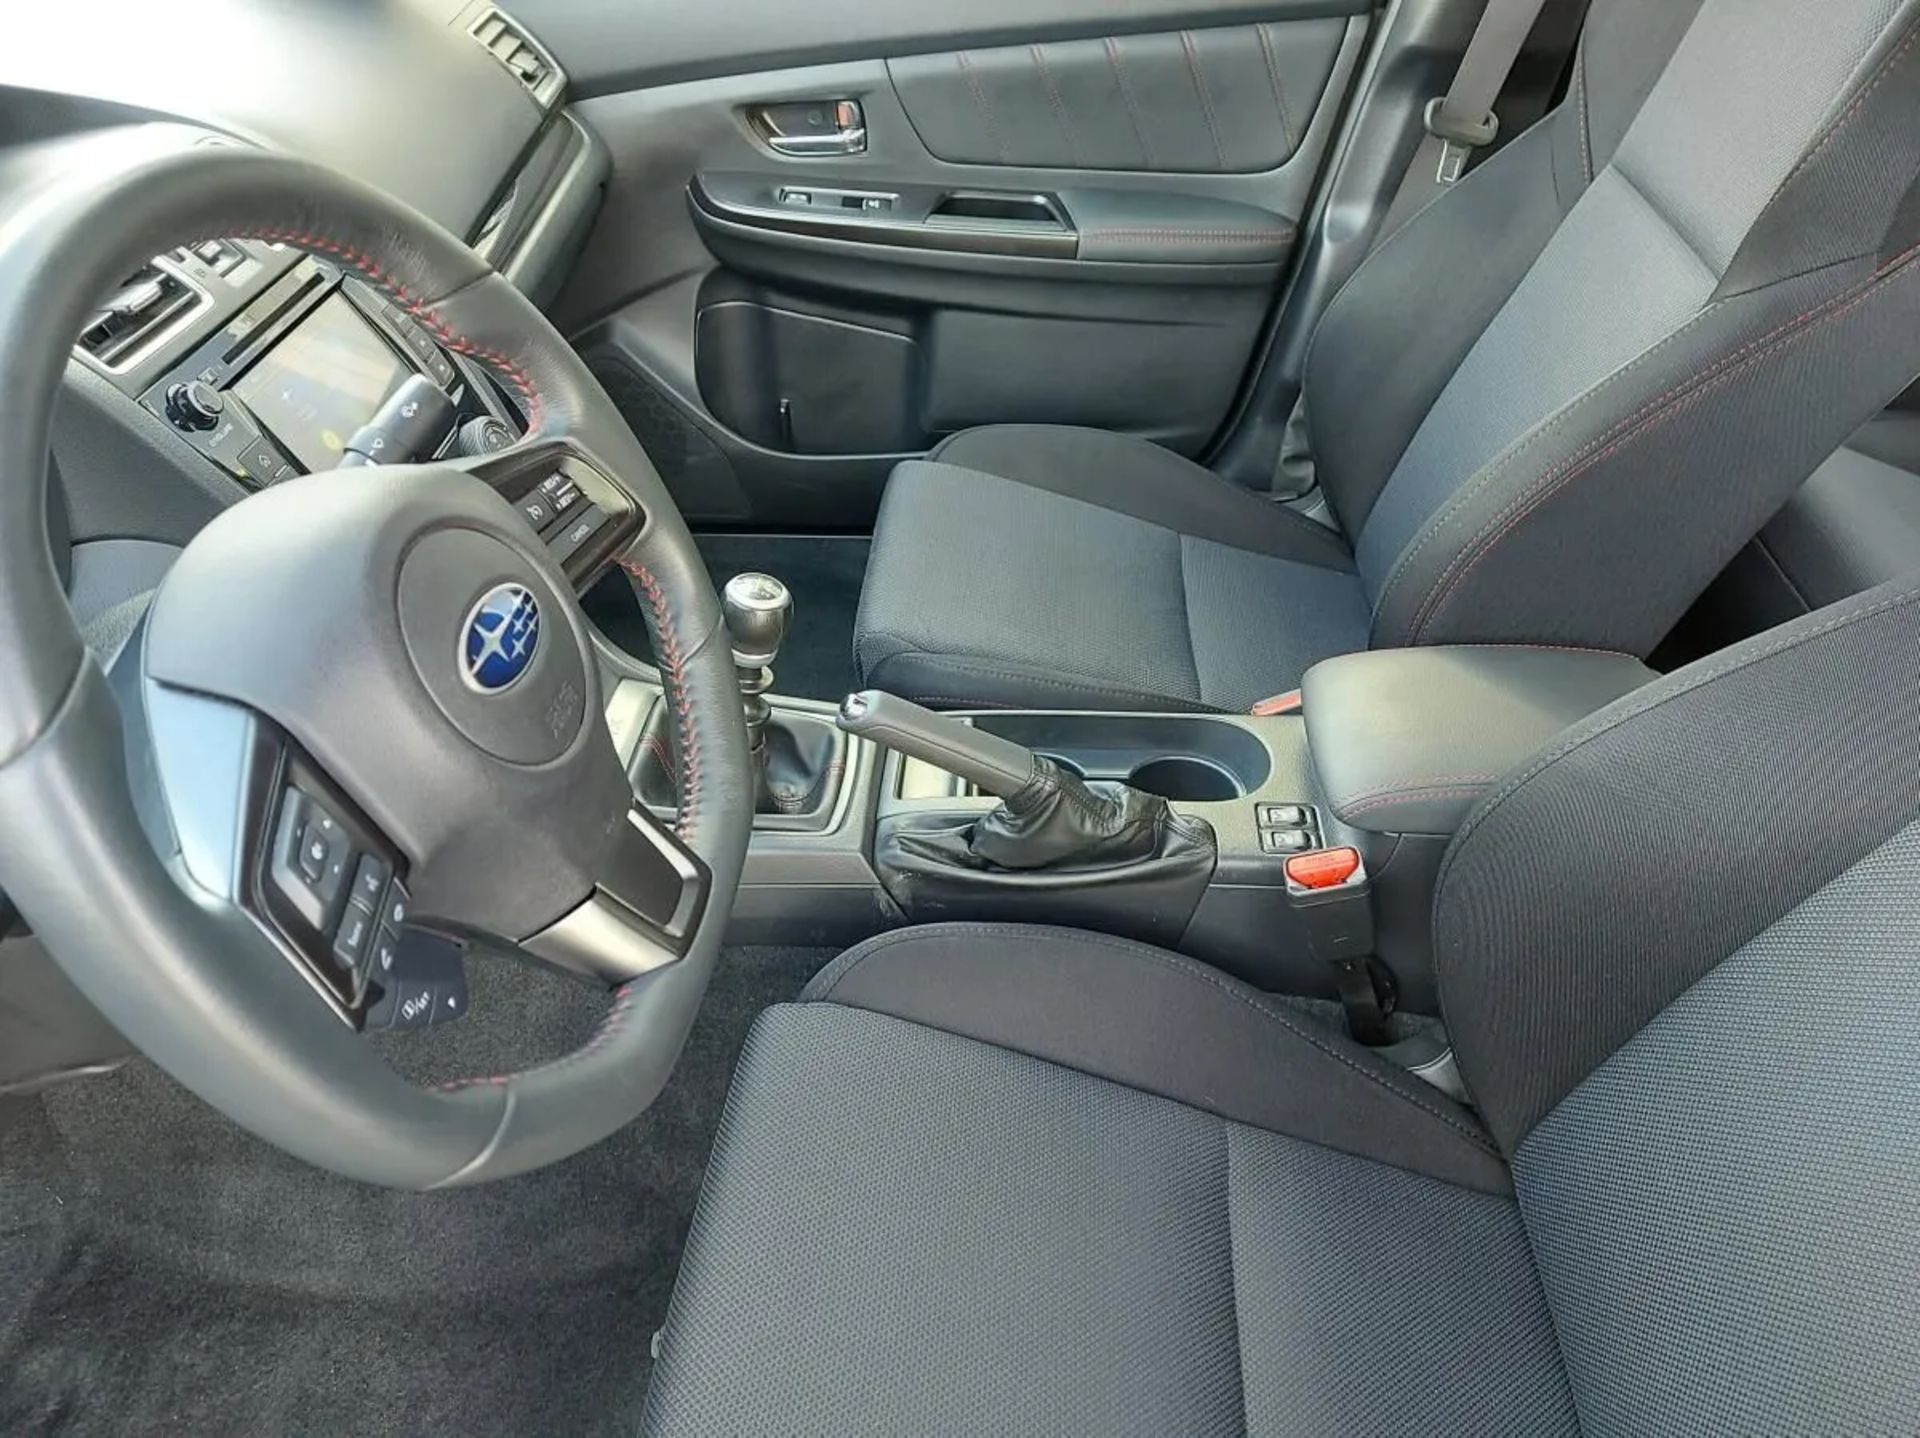 2021 SUBARU WRX 6 SPEED! ONE OWNER! NO MODS! CLEAN CARFAX! - Image 8 of 29